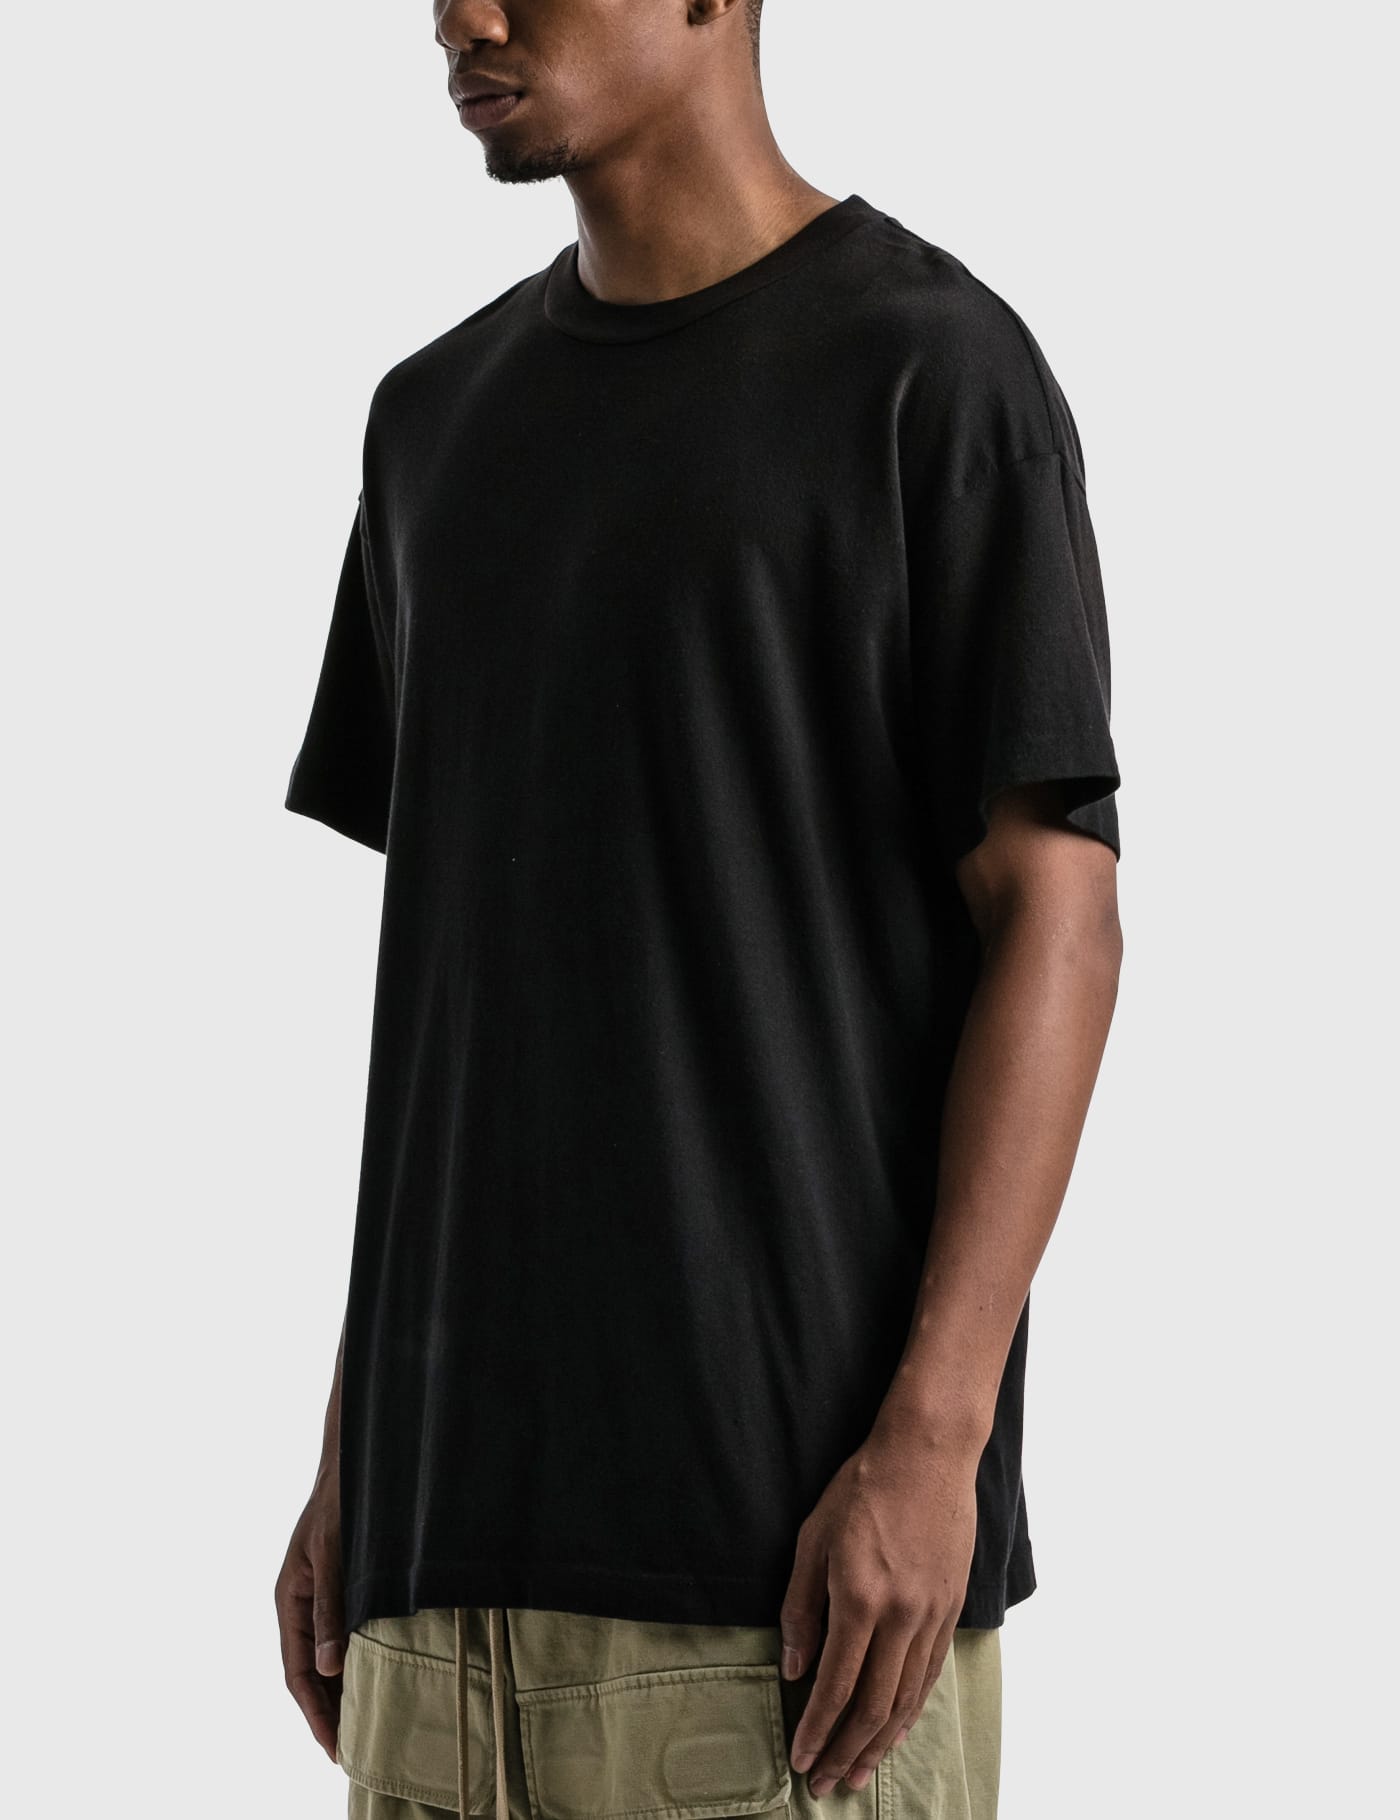 Fear of God - Perfect Vintage T-shirt | HBX - Globally Curated ...